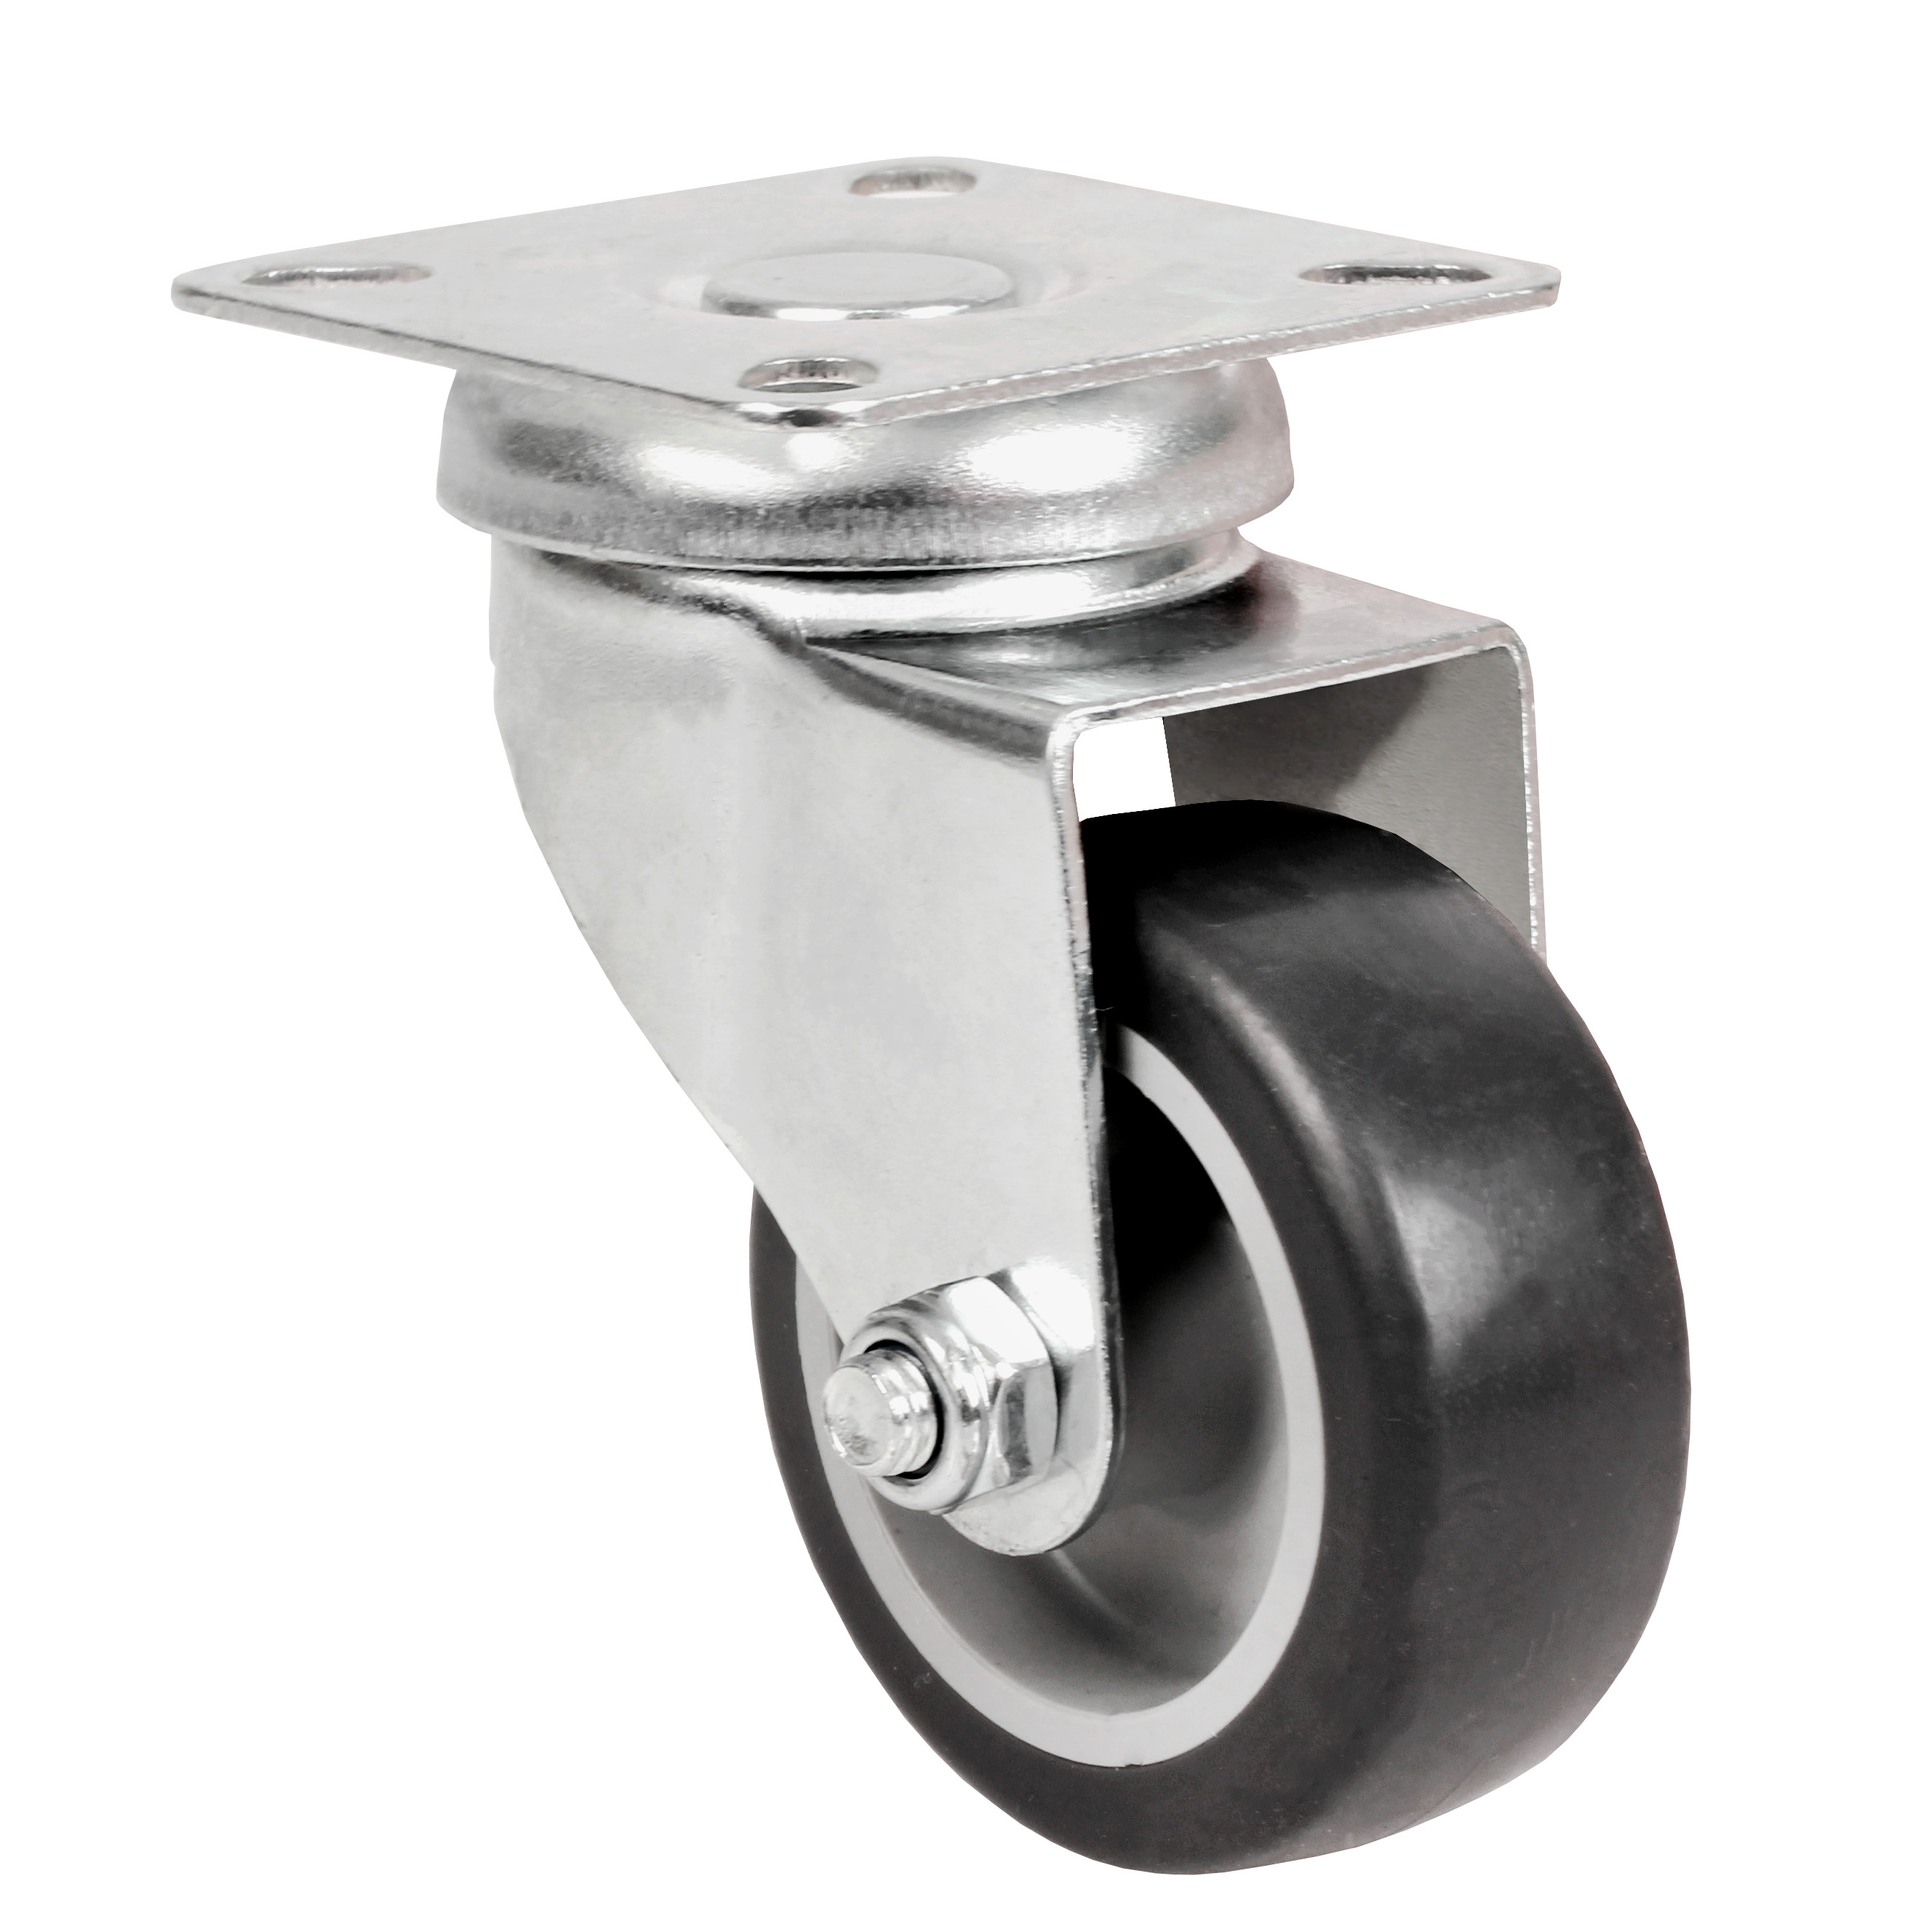 Swivel castor with plate - Steel - grey rubber - up to 110kg - No